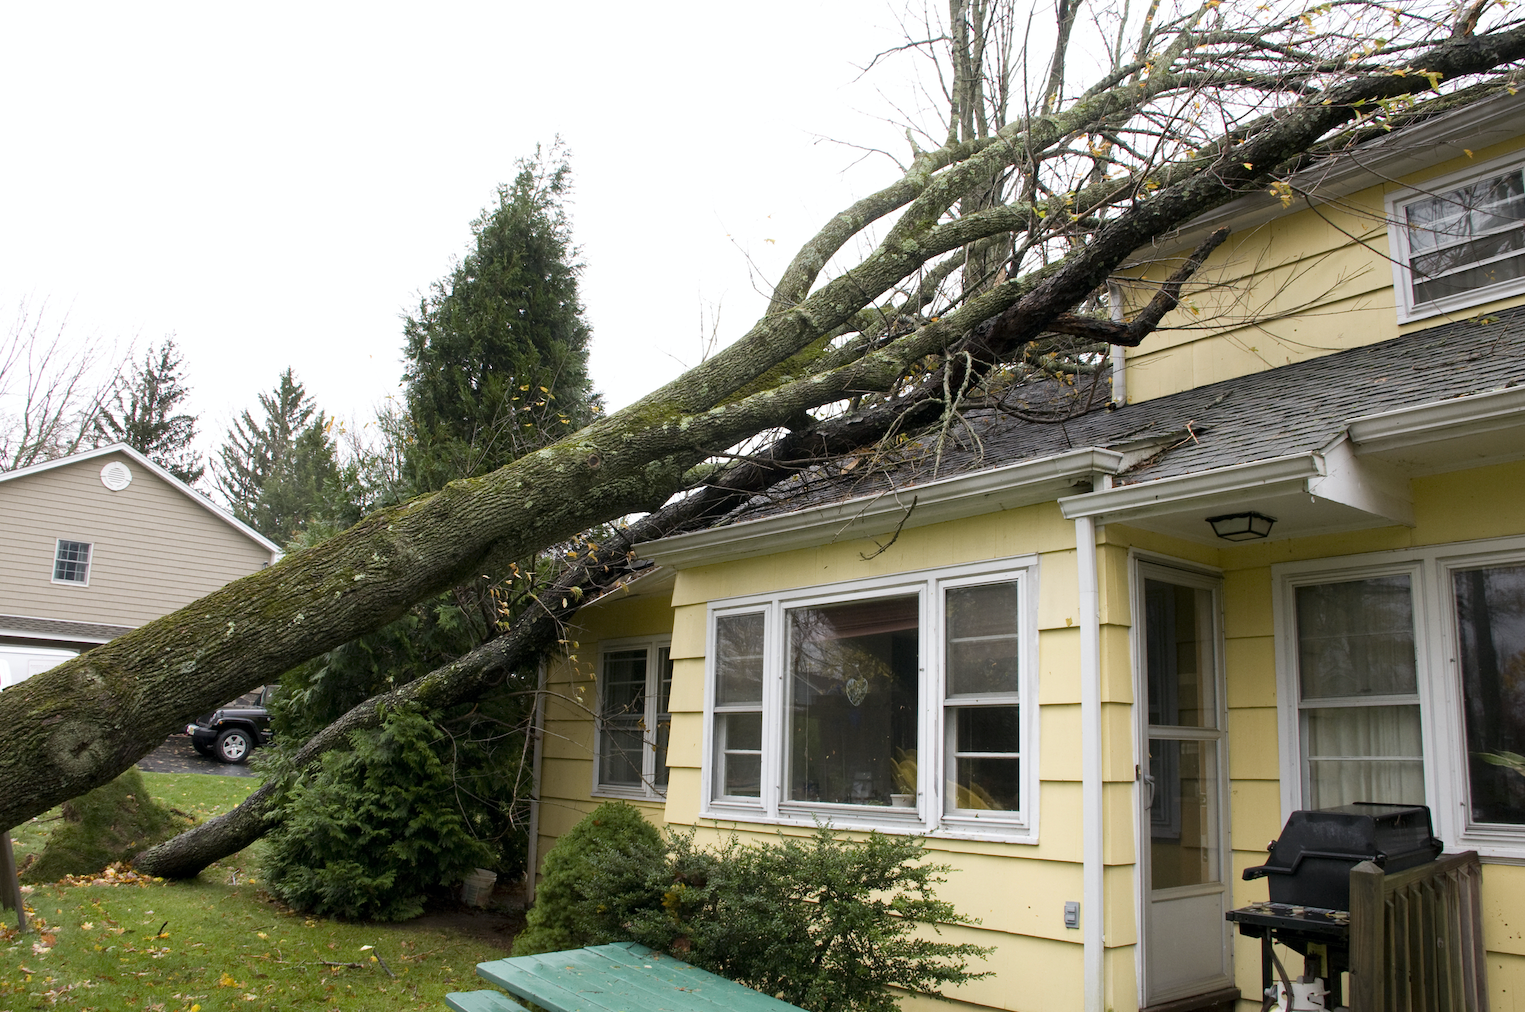 Tree that has fallen on a home